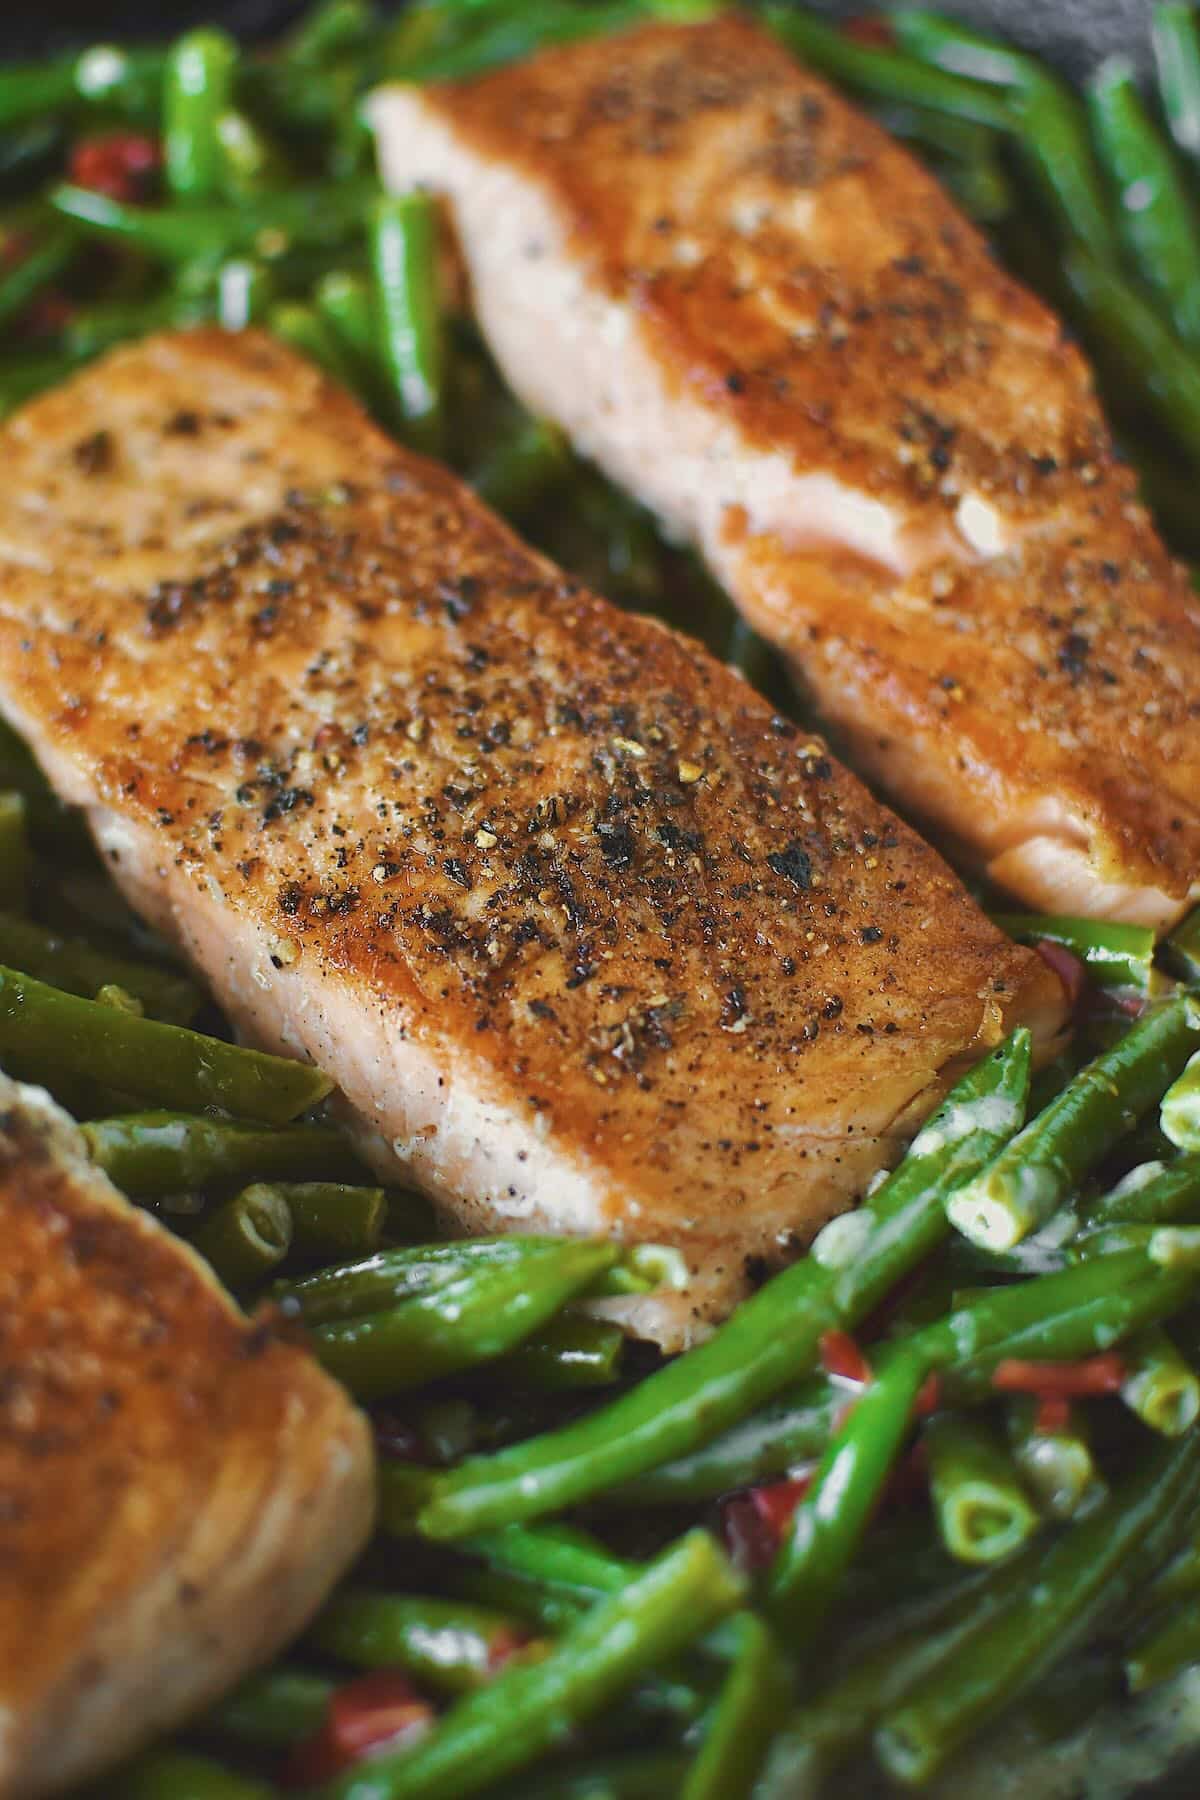 Pan Seared Salmon fillets nestled into some sauteed green beans.